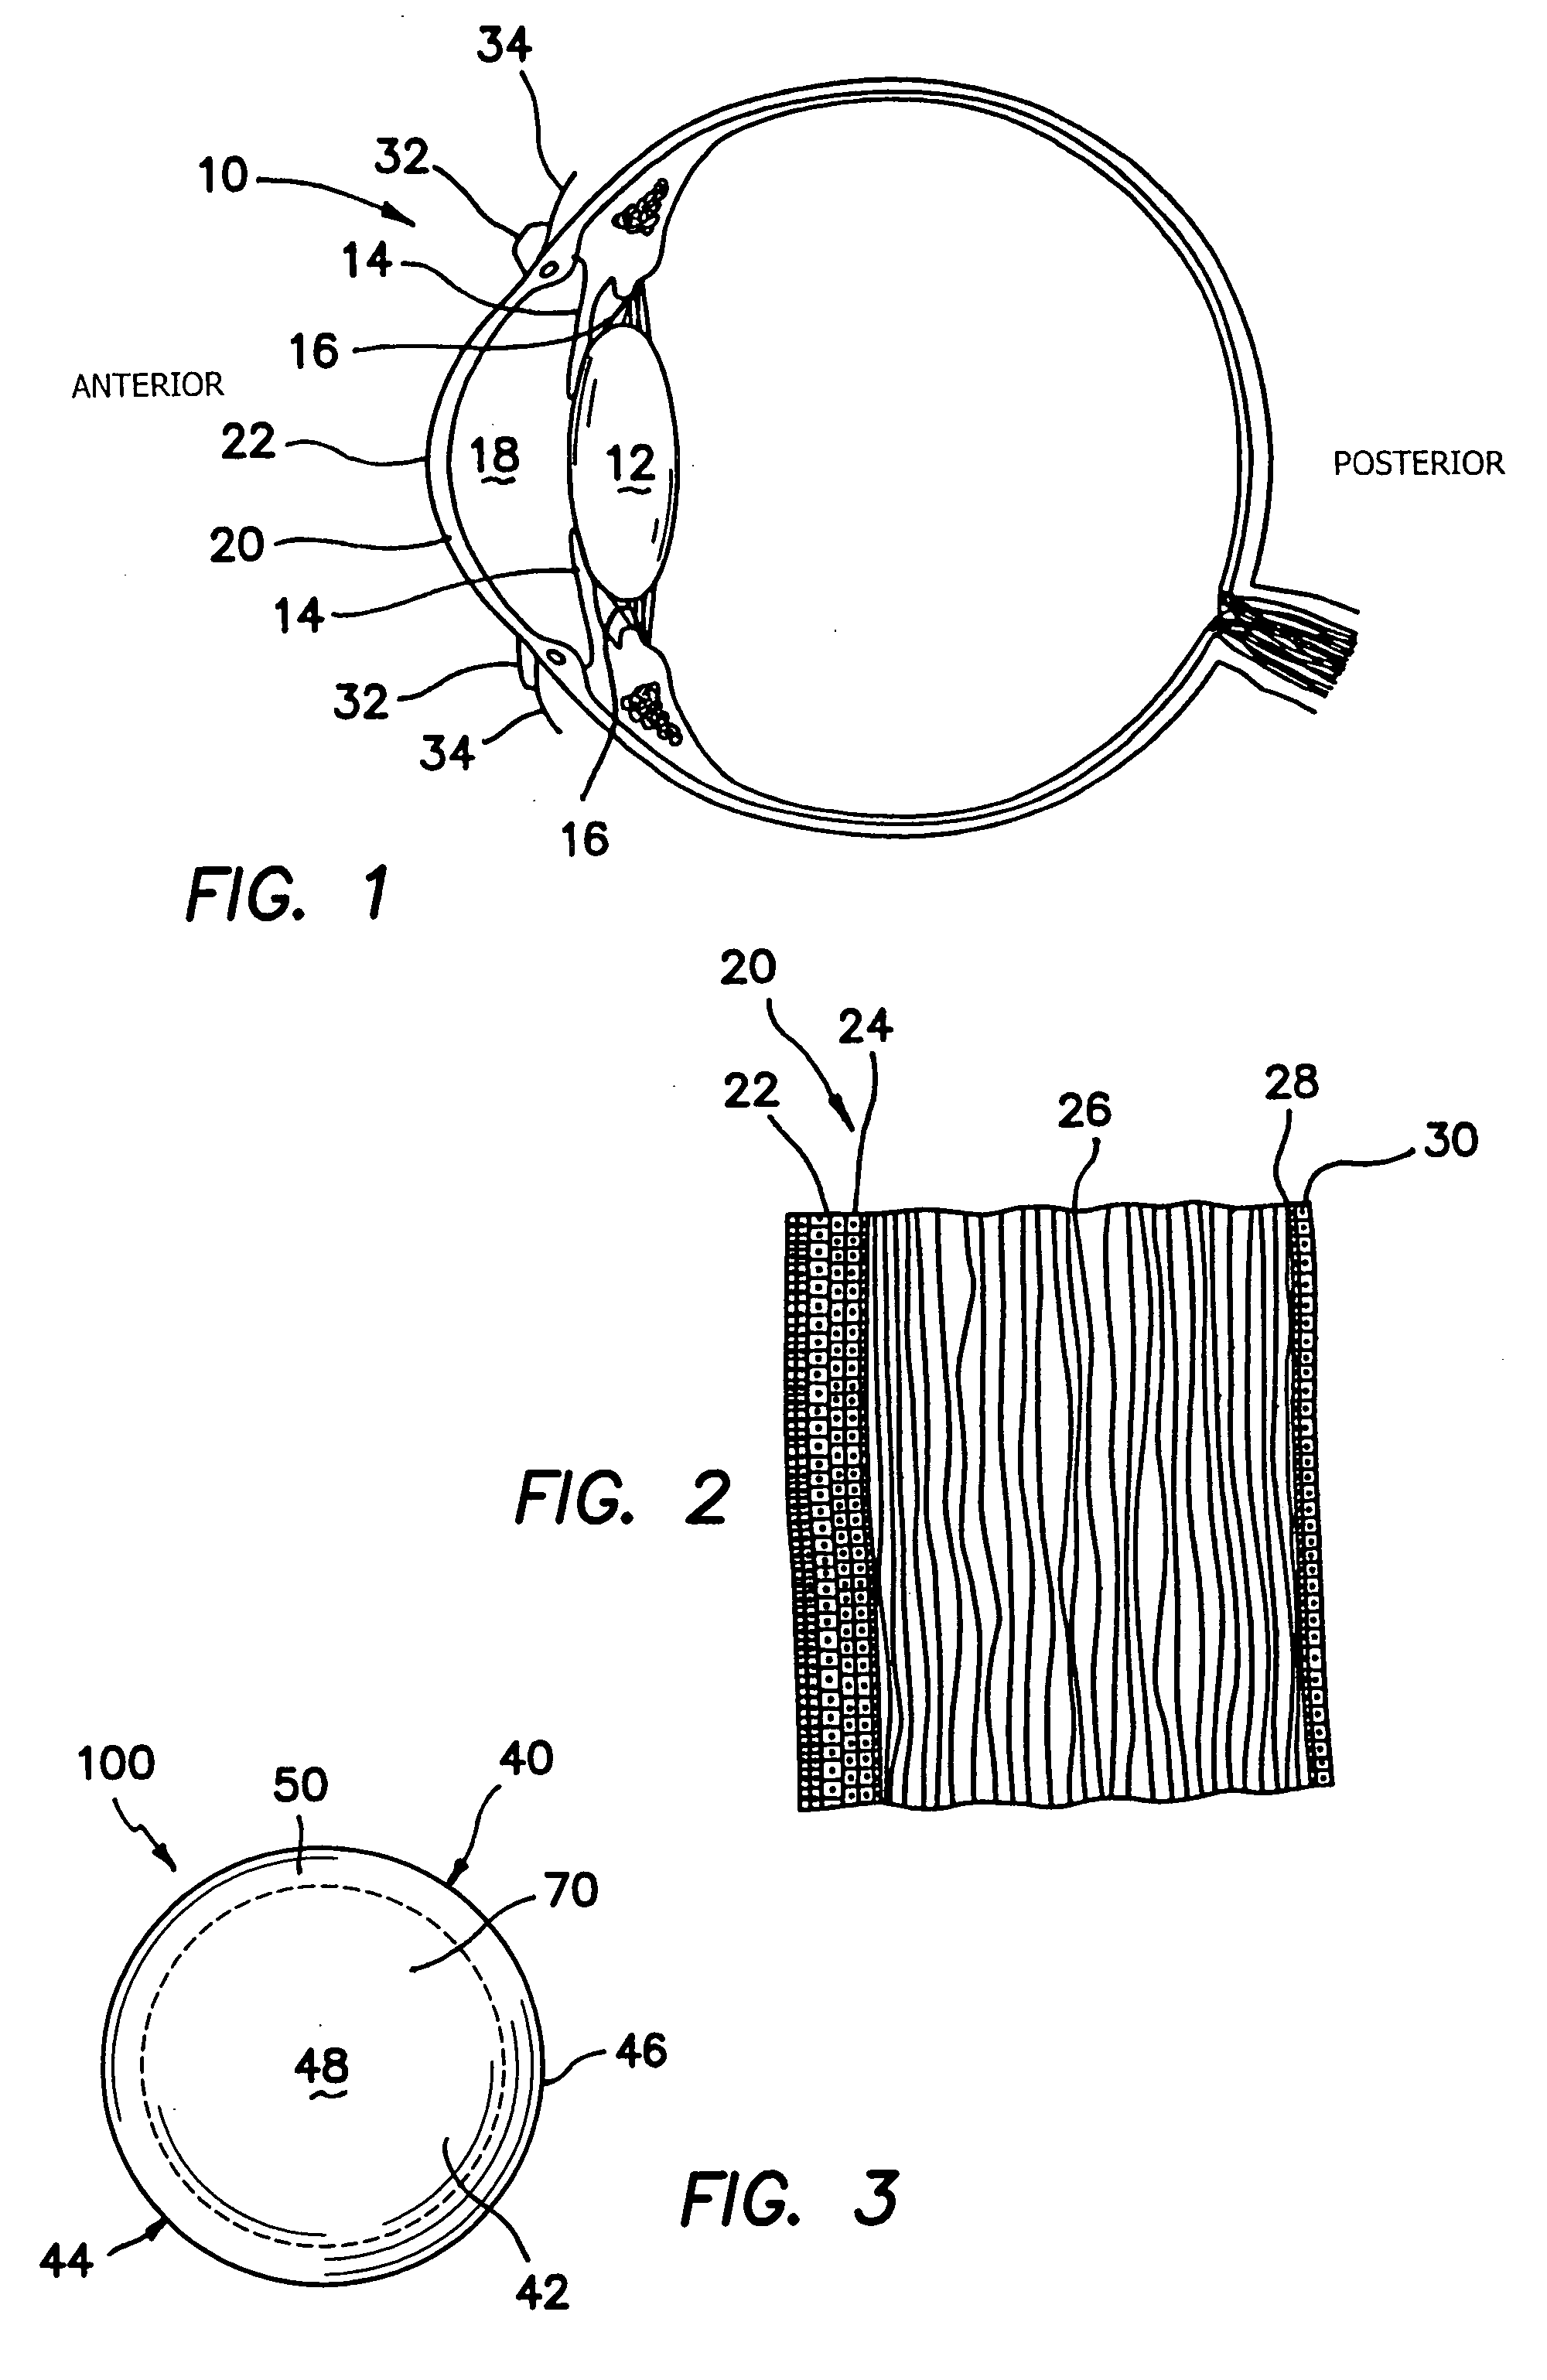 Intrastromal devices and methods for improving vision